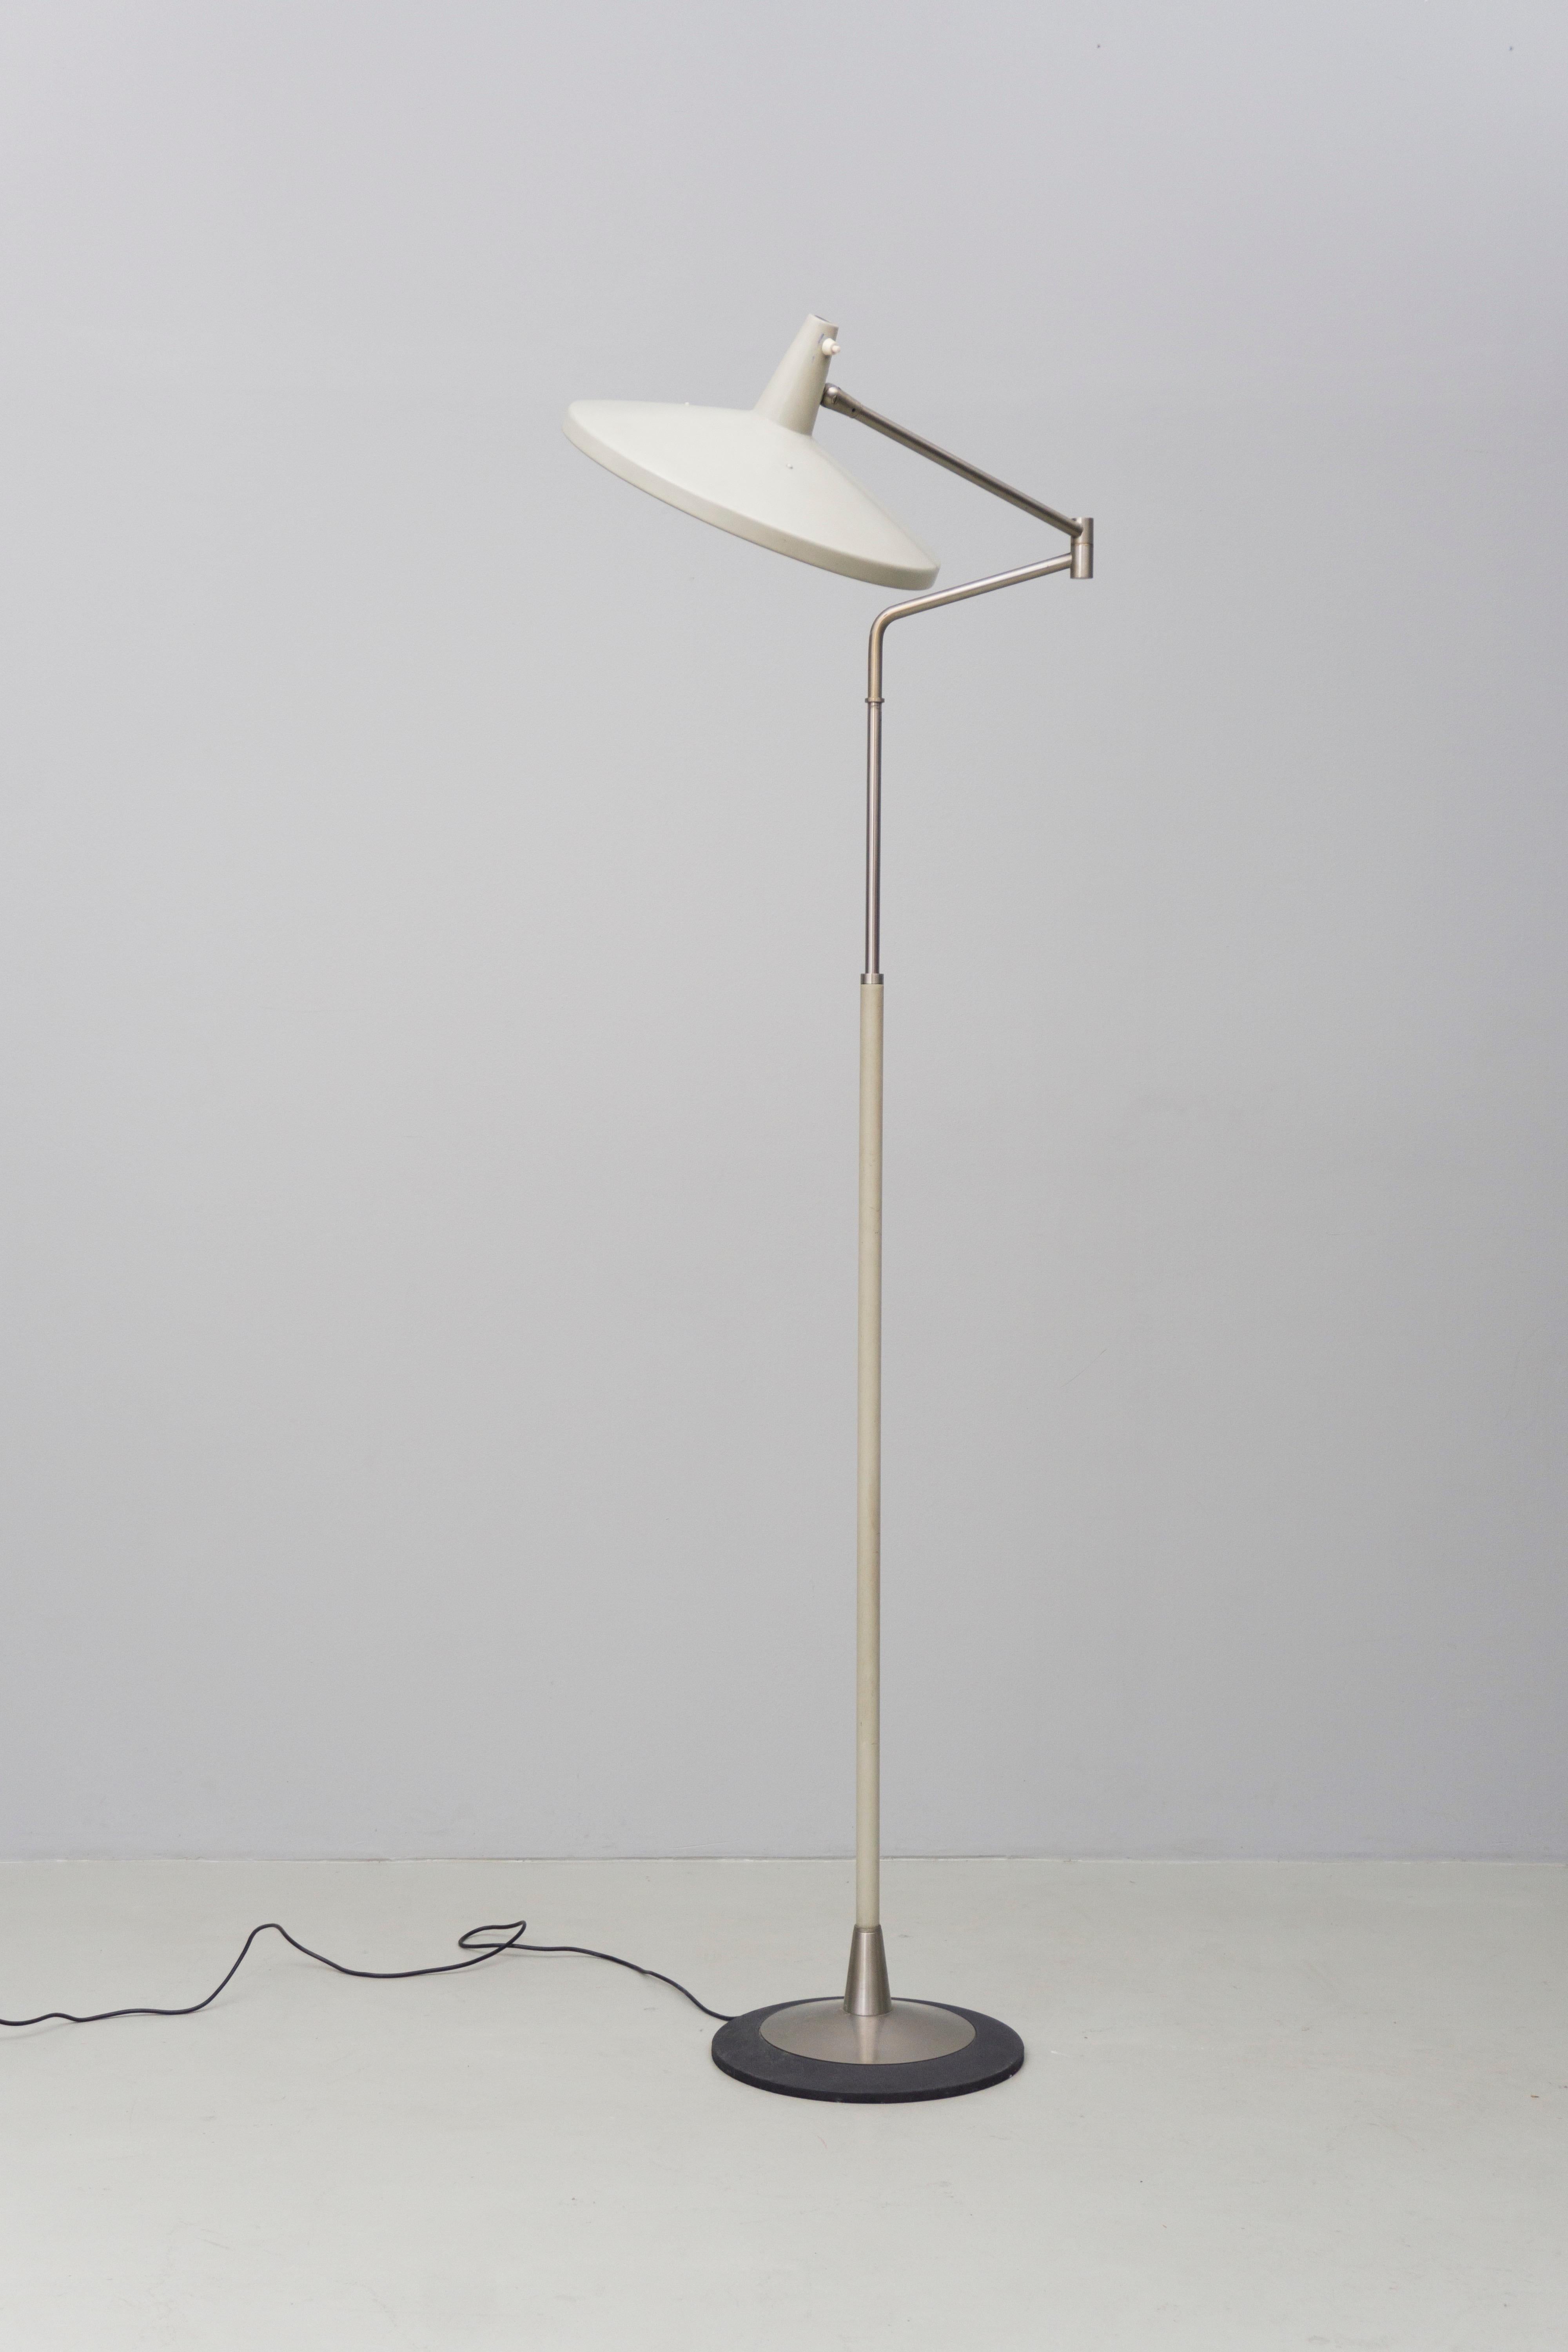 This standing lamp by Stilnovo is a perfection in mixing industrial design references with a sensual silhouette and refined detailing. The lampshade and height are adjustable, so there is an easy adaption of light situations. The eggshell lacquering